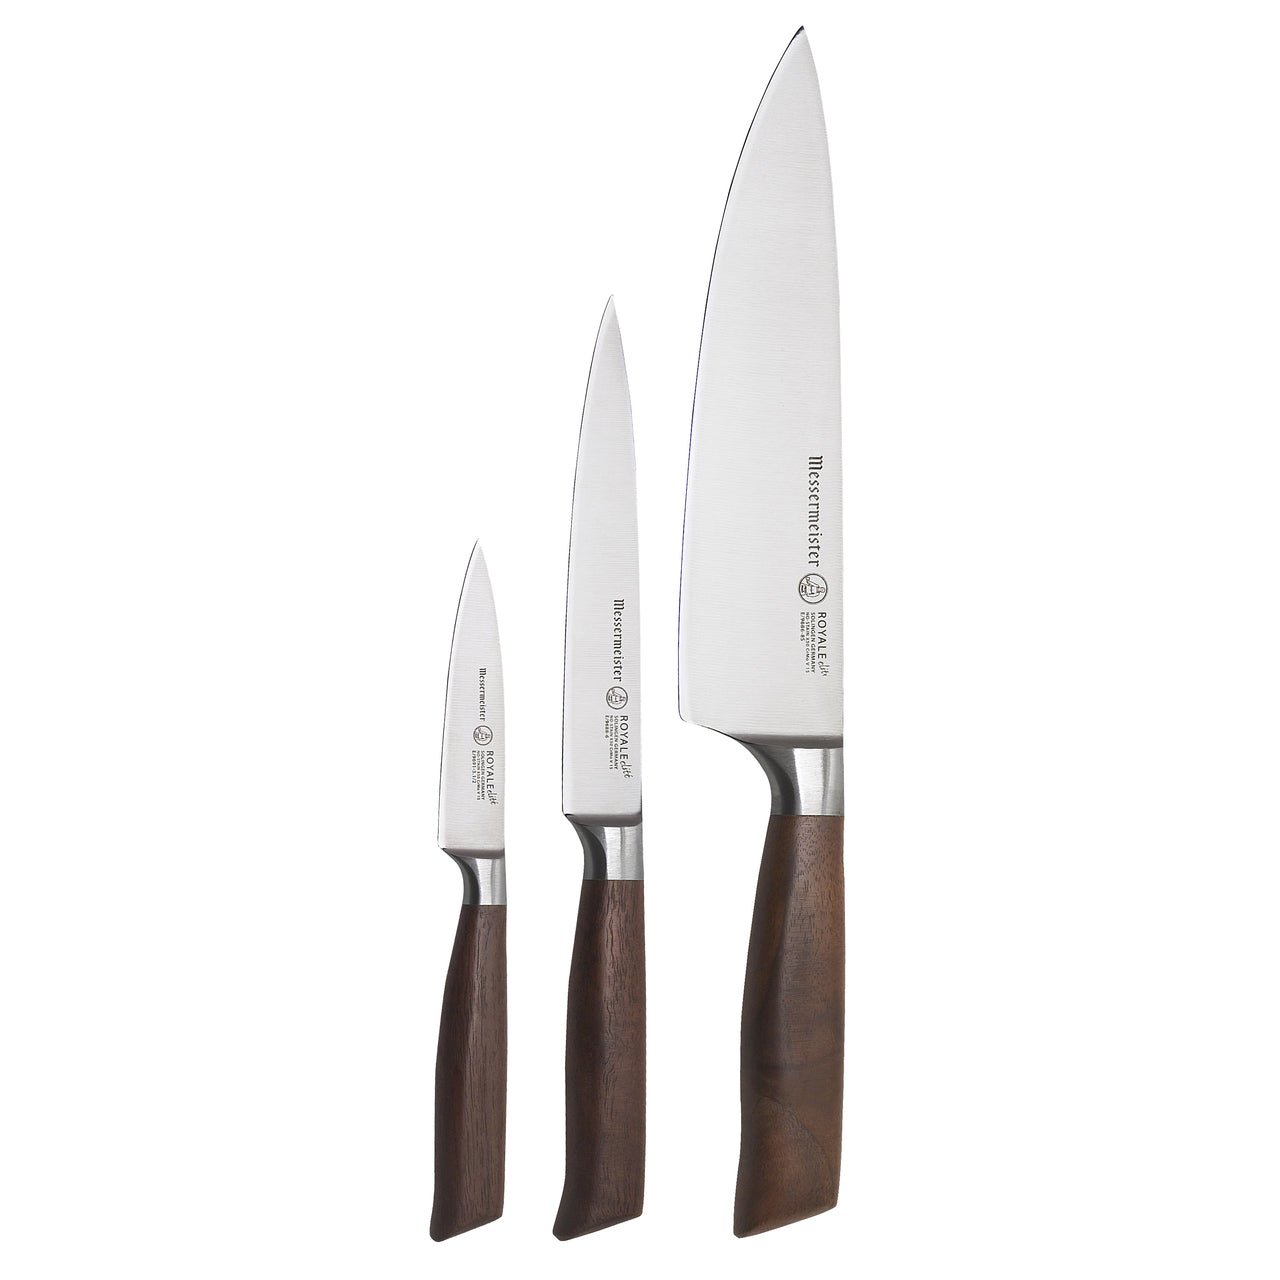 BEON.COM.AU E9000 3S         Royal Elite 3 Piece Starter Set The Messermeister Royale Elité 3 Piece Starter Set consists of an 8 Inch Stealth Chef's Knife (E9686 8S), 6 Inch Utility Knife (E9688 6), and 3.5 Inch Spear Point Paring Knife (E9691 3). These three are the most utilized knives in the kitchen. ... Messermeister at BEON.COM.AU